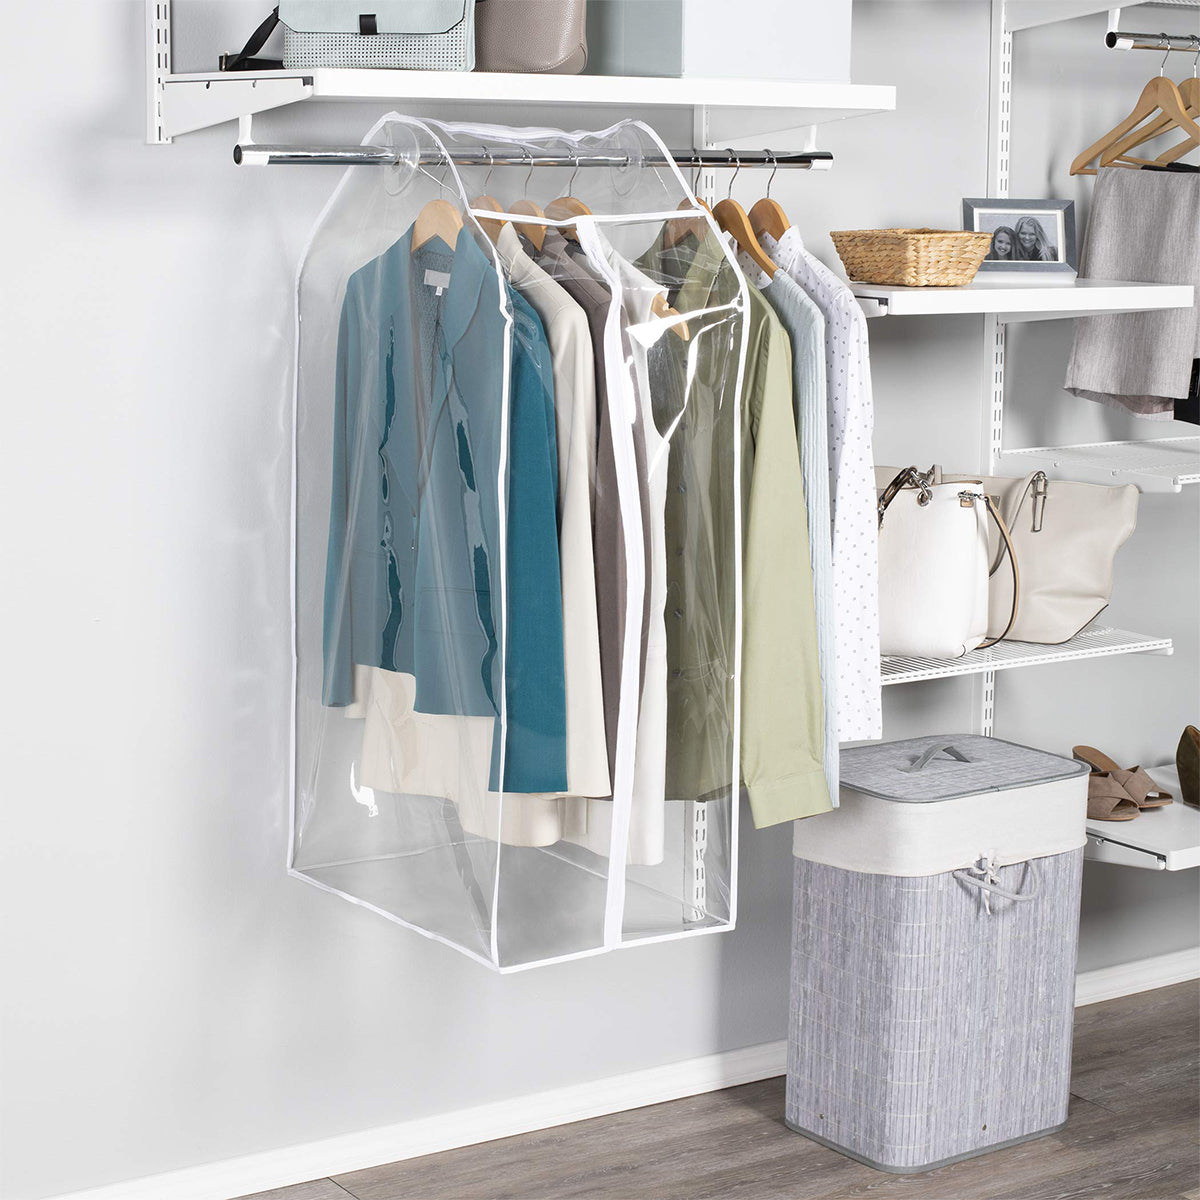 Hanging Suit Closet - Dust Free Storage For Suits And Other Garments